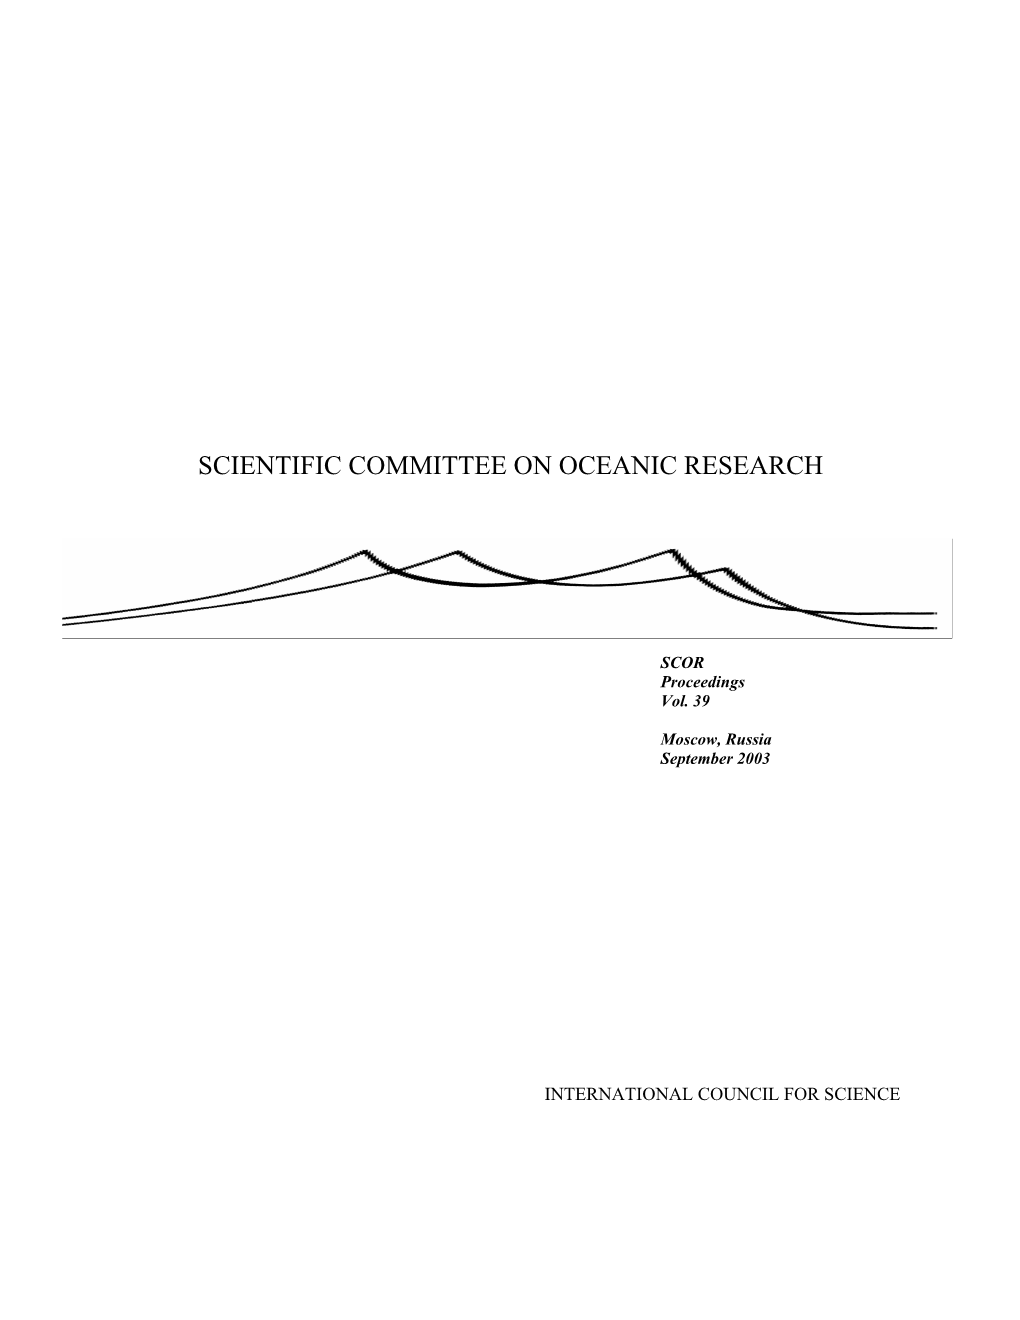 Scientific Committee on Oceanic Research